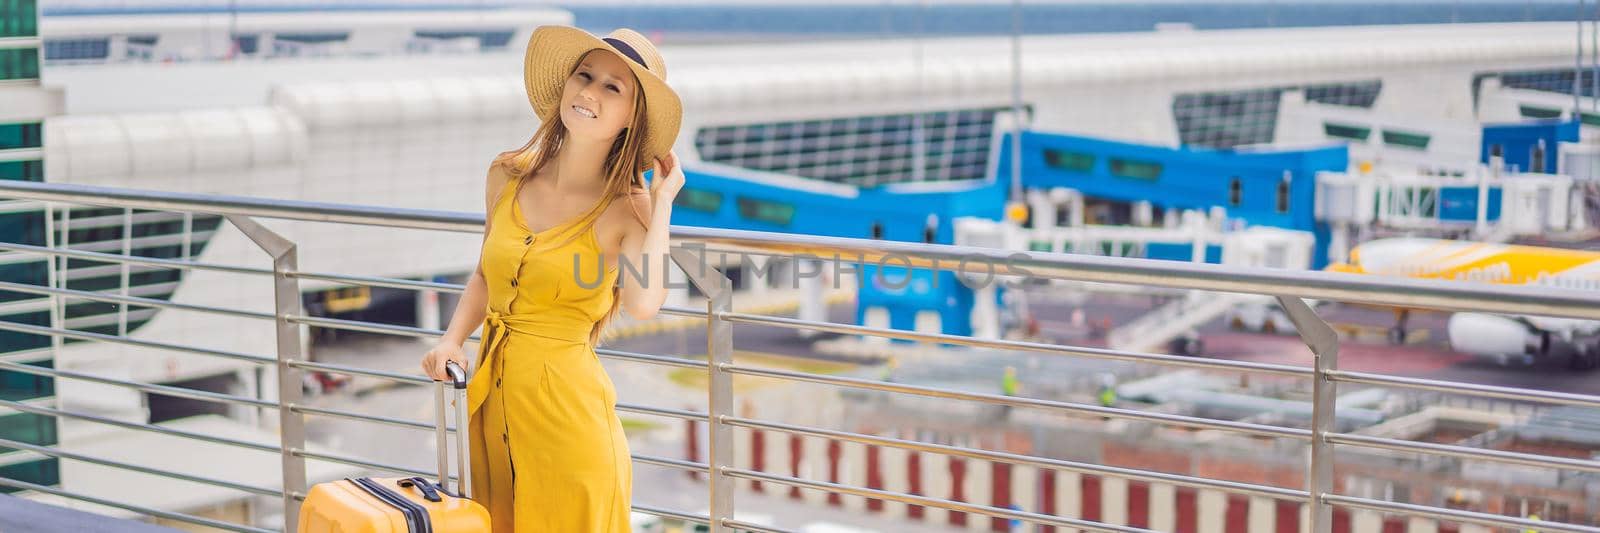 Start of her journey. Beautiful young woman ltraveler in a yellow dress and a yellow suitcase is waiting for her flight BANNER, LONG FORMAT by galitskaya